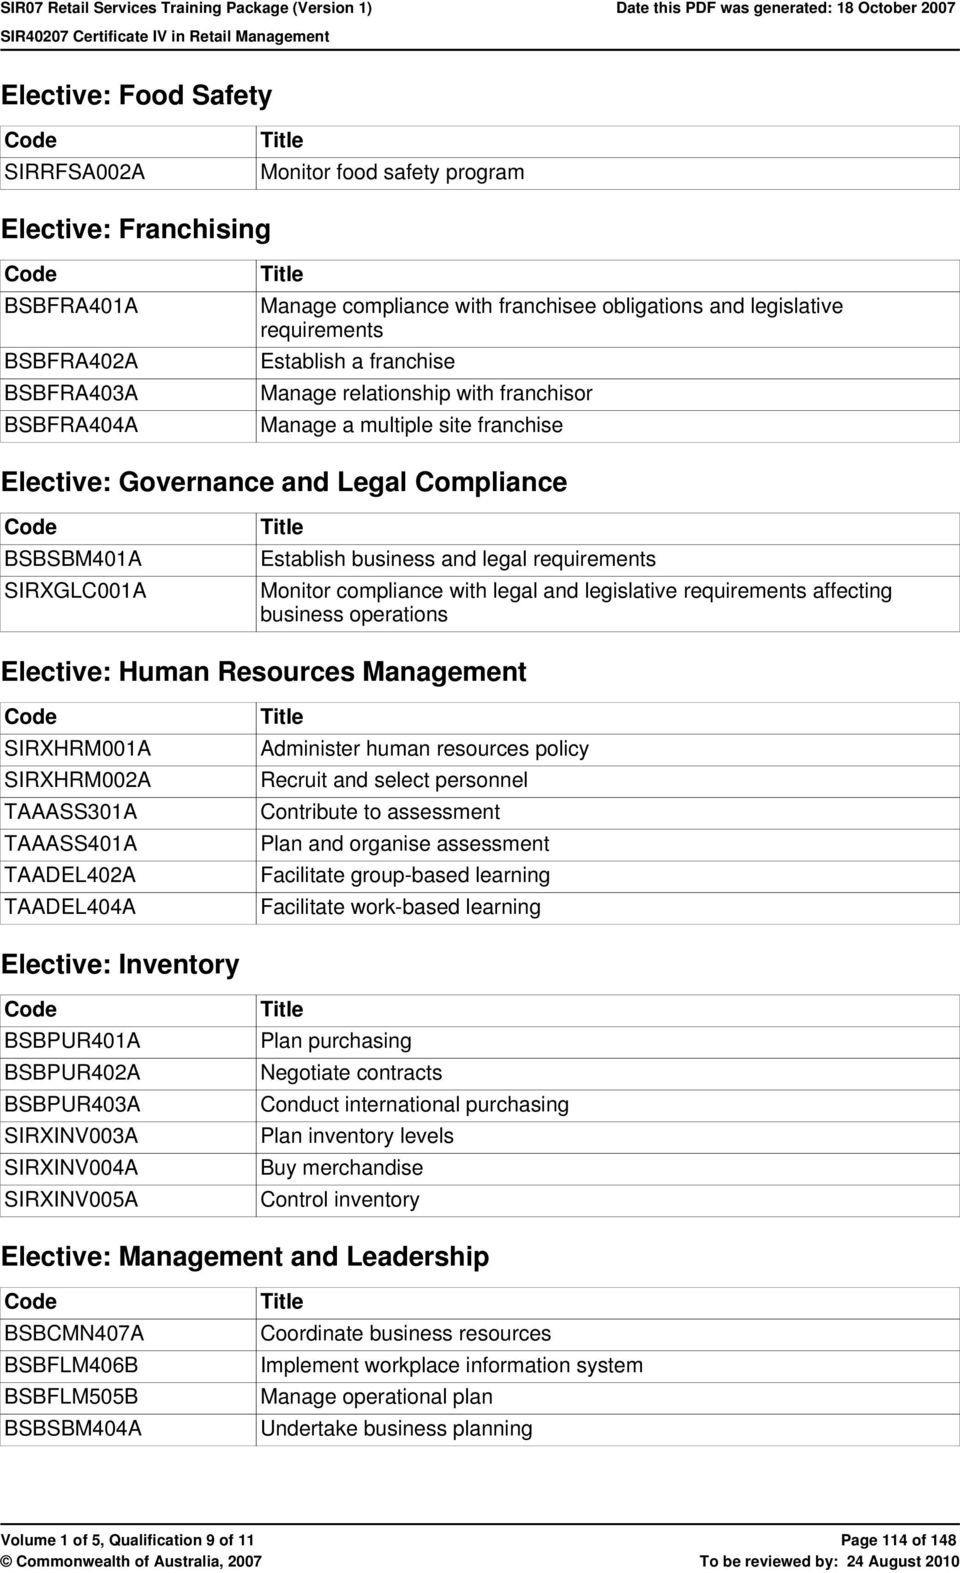 requirements Monitor compliance with legal and legislative requirements affecting business operations Elective: Human Resources Management SIRXHRM001A SIRXHRM002A TAAASS301A TAAASS401A TAADEL402A